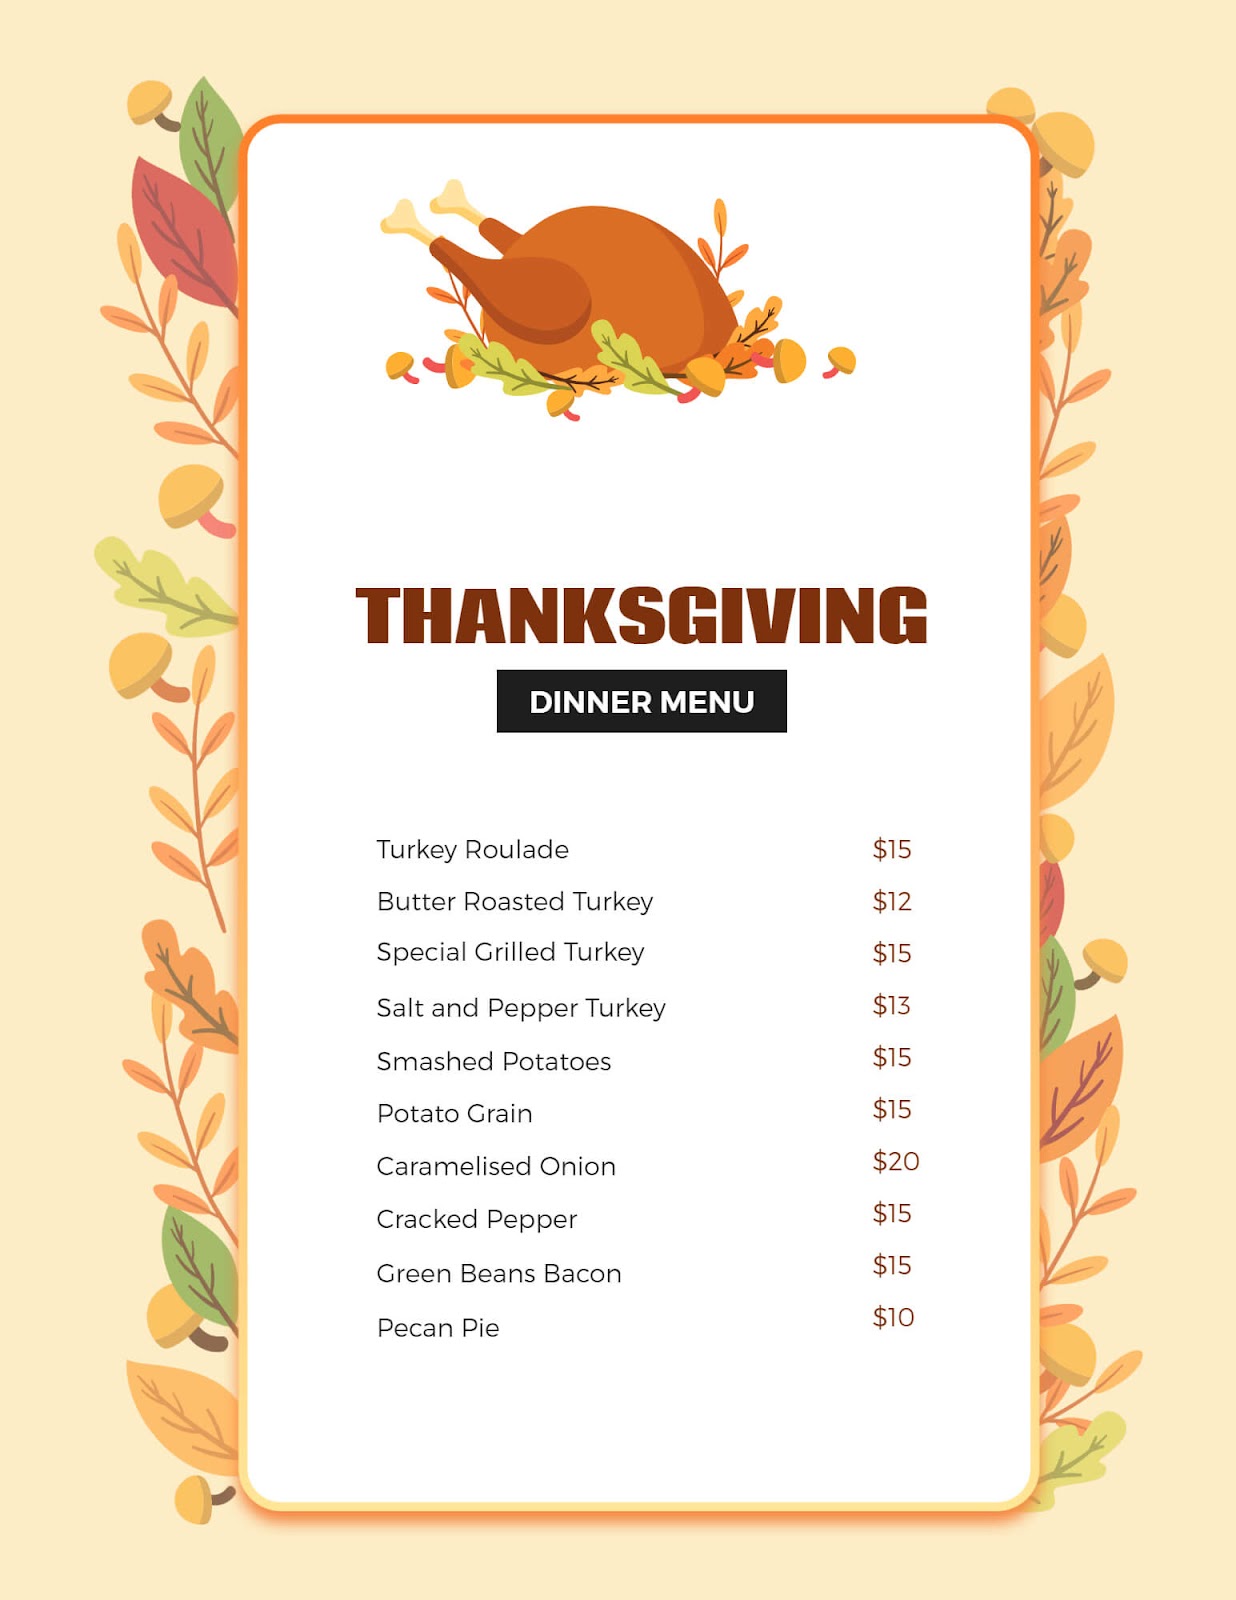 Thanksgiving Menu Design Ideas, Examples, and Samples